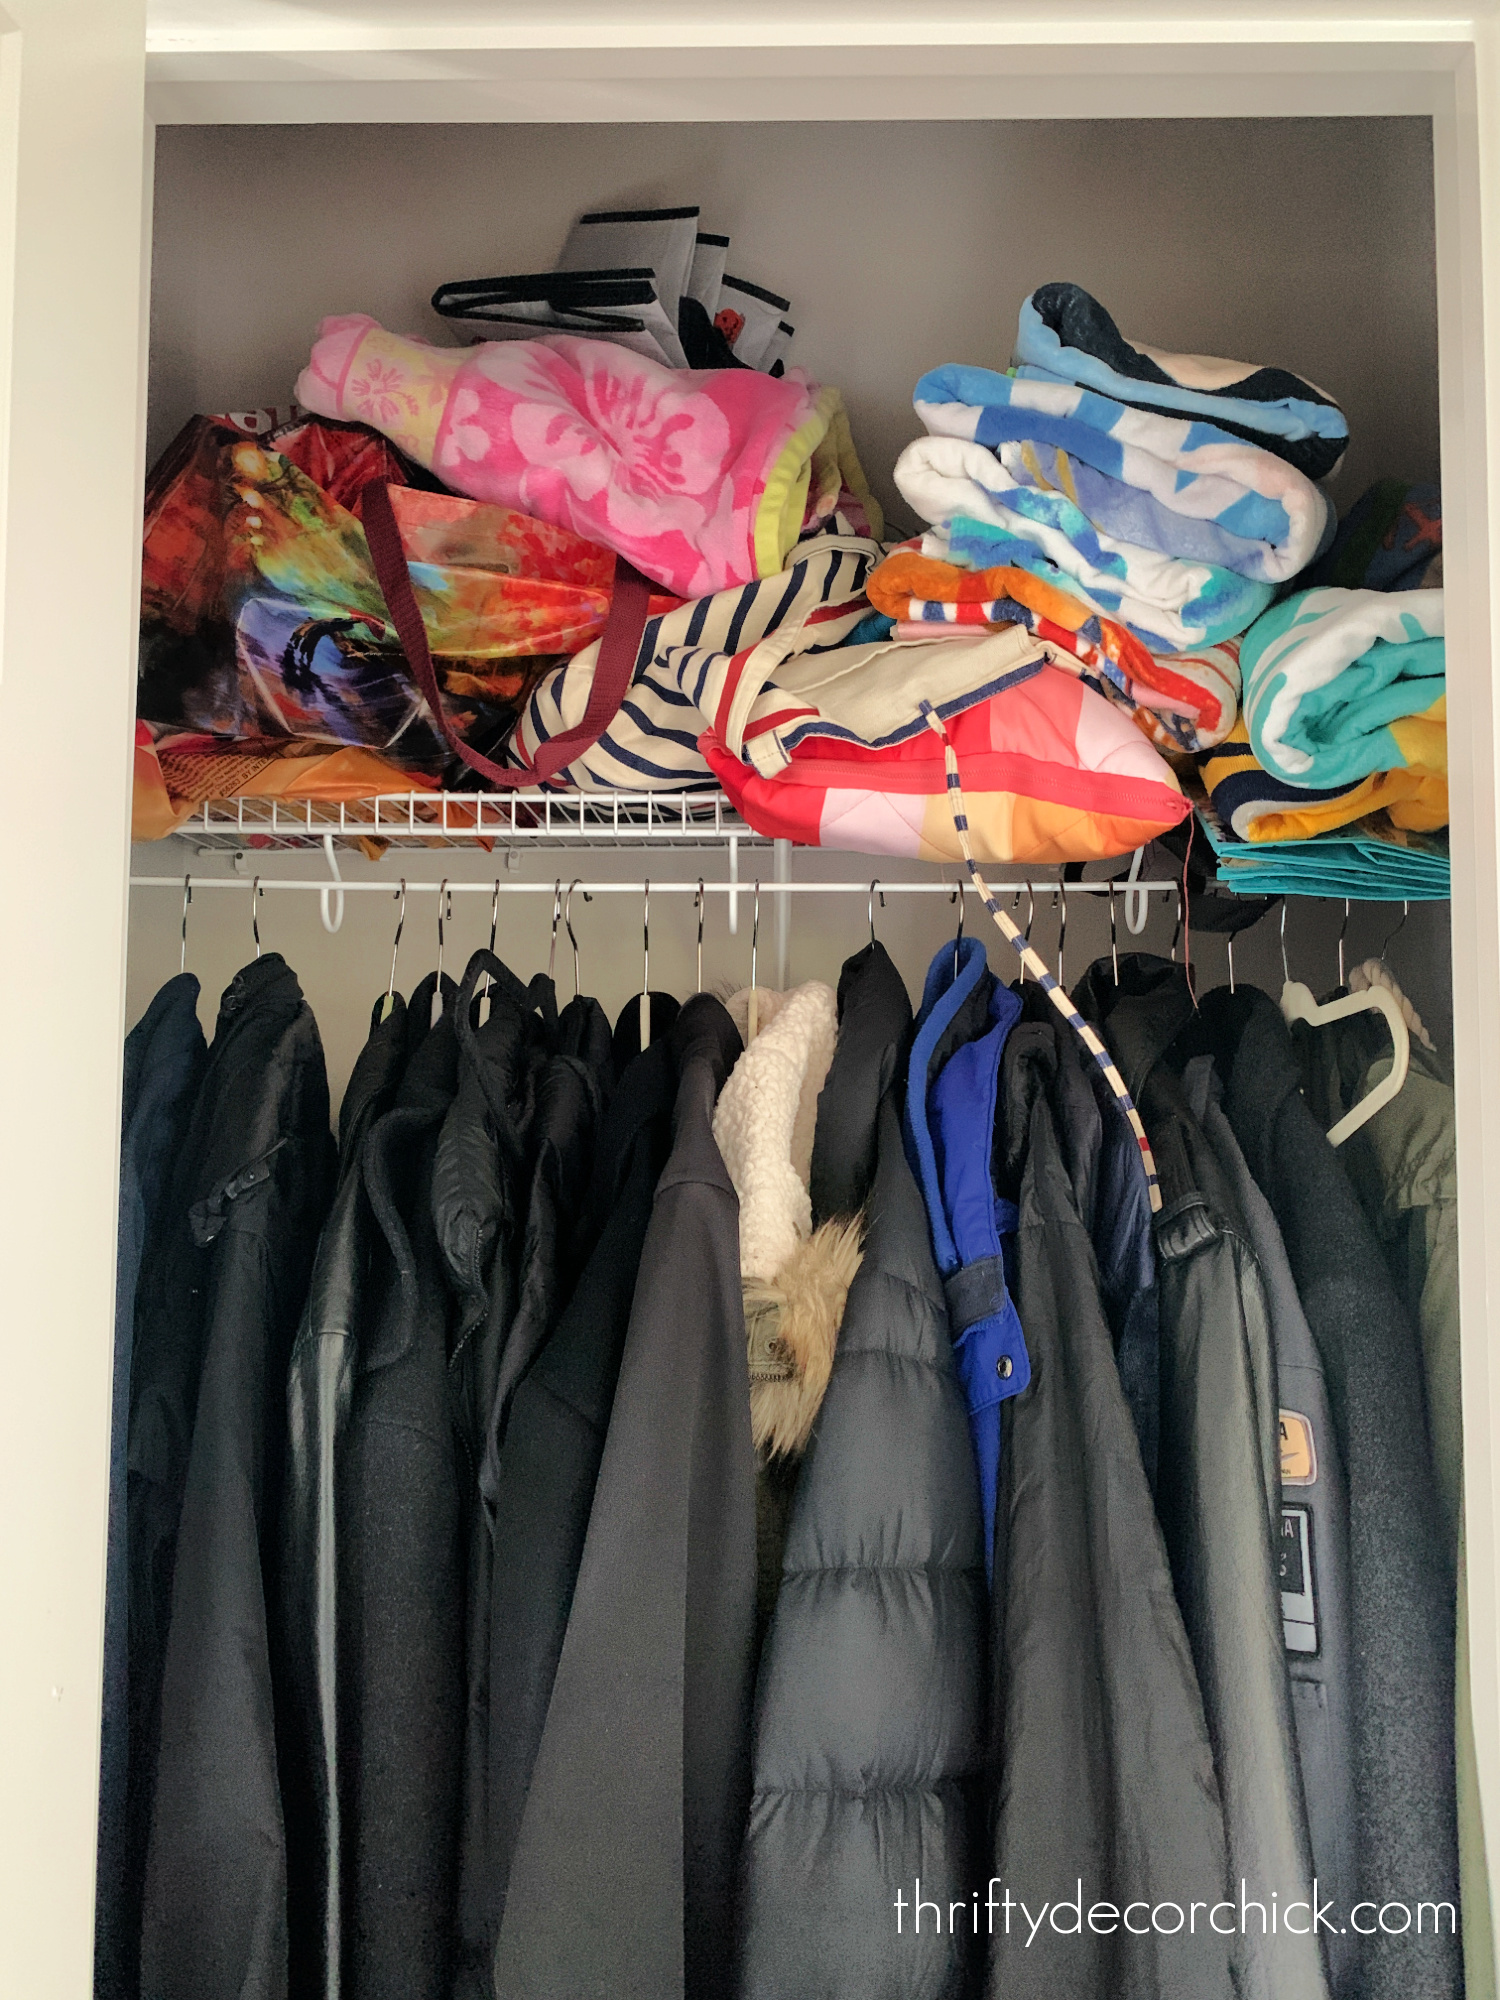 Easy Fixes for a Messy Coat Closet, Thrifty Decor Chick